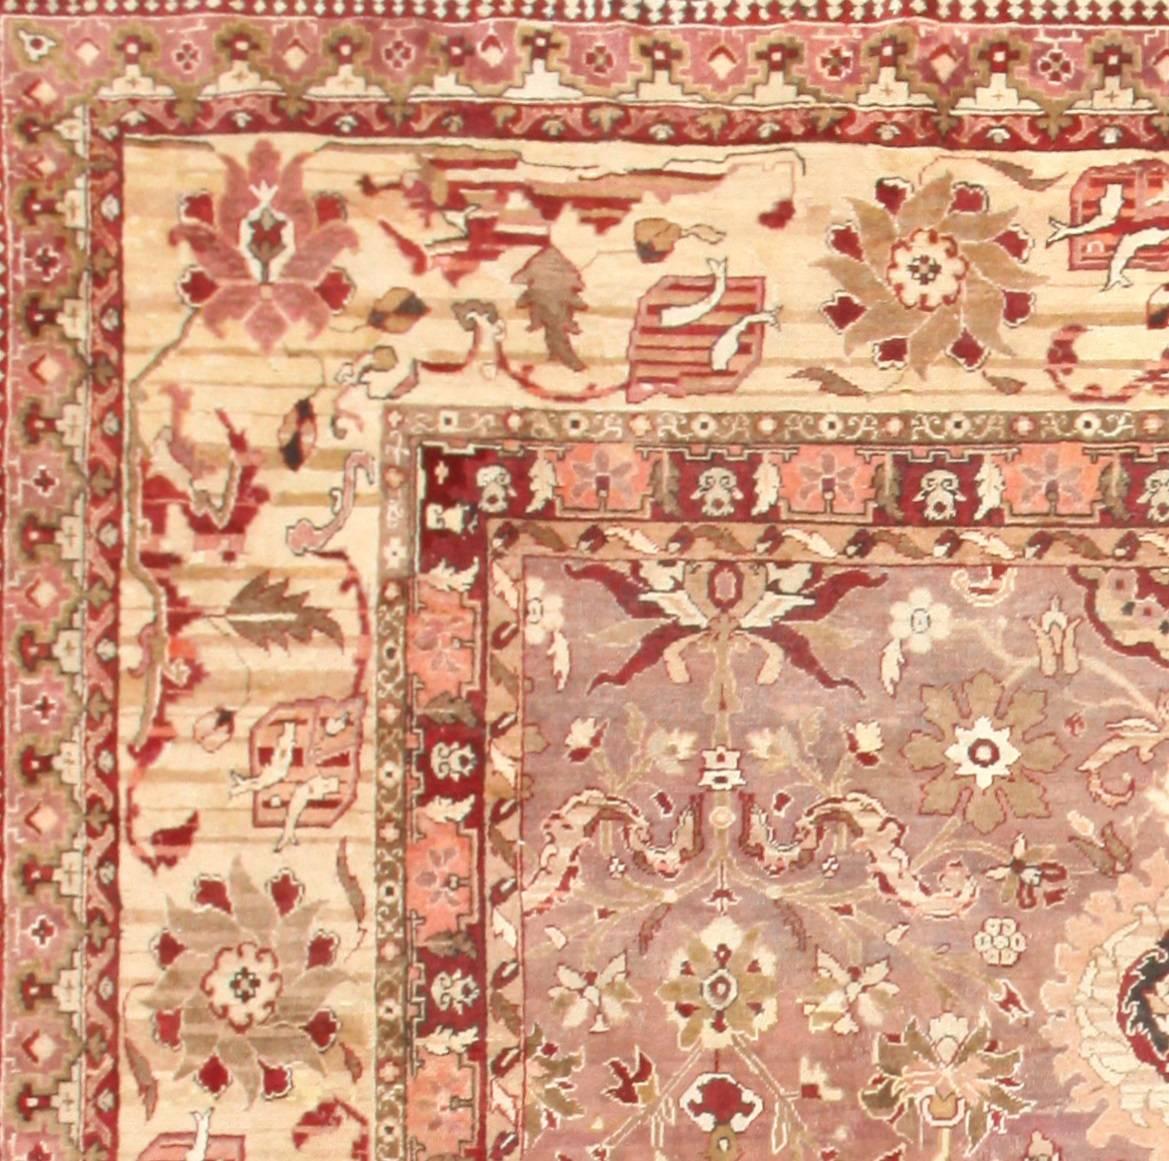 Large Square Size Mauve Colored Background Antique Indian Agra Rug, Country of Origin: India, Circa Date: 1900. Size: 13 ft 6 in x 13 ft 6 in (4.11 m x 4.11 m)

This beautiful antique Indian Agra rug features a broad surface area, which provides the